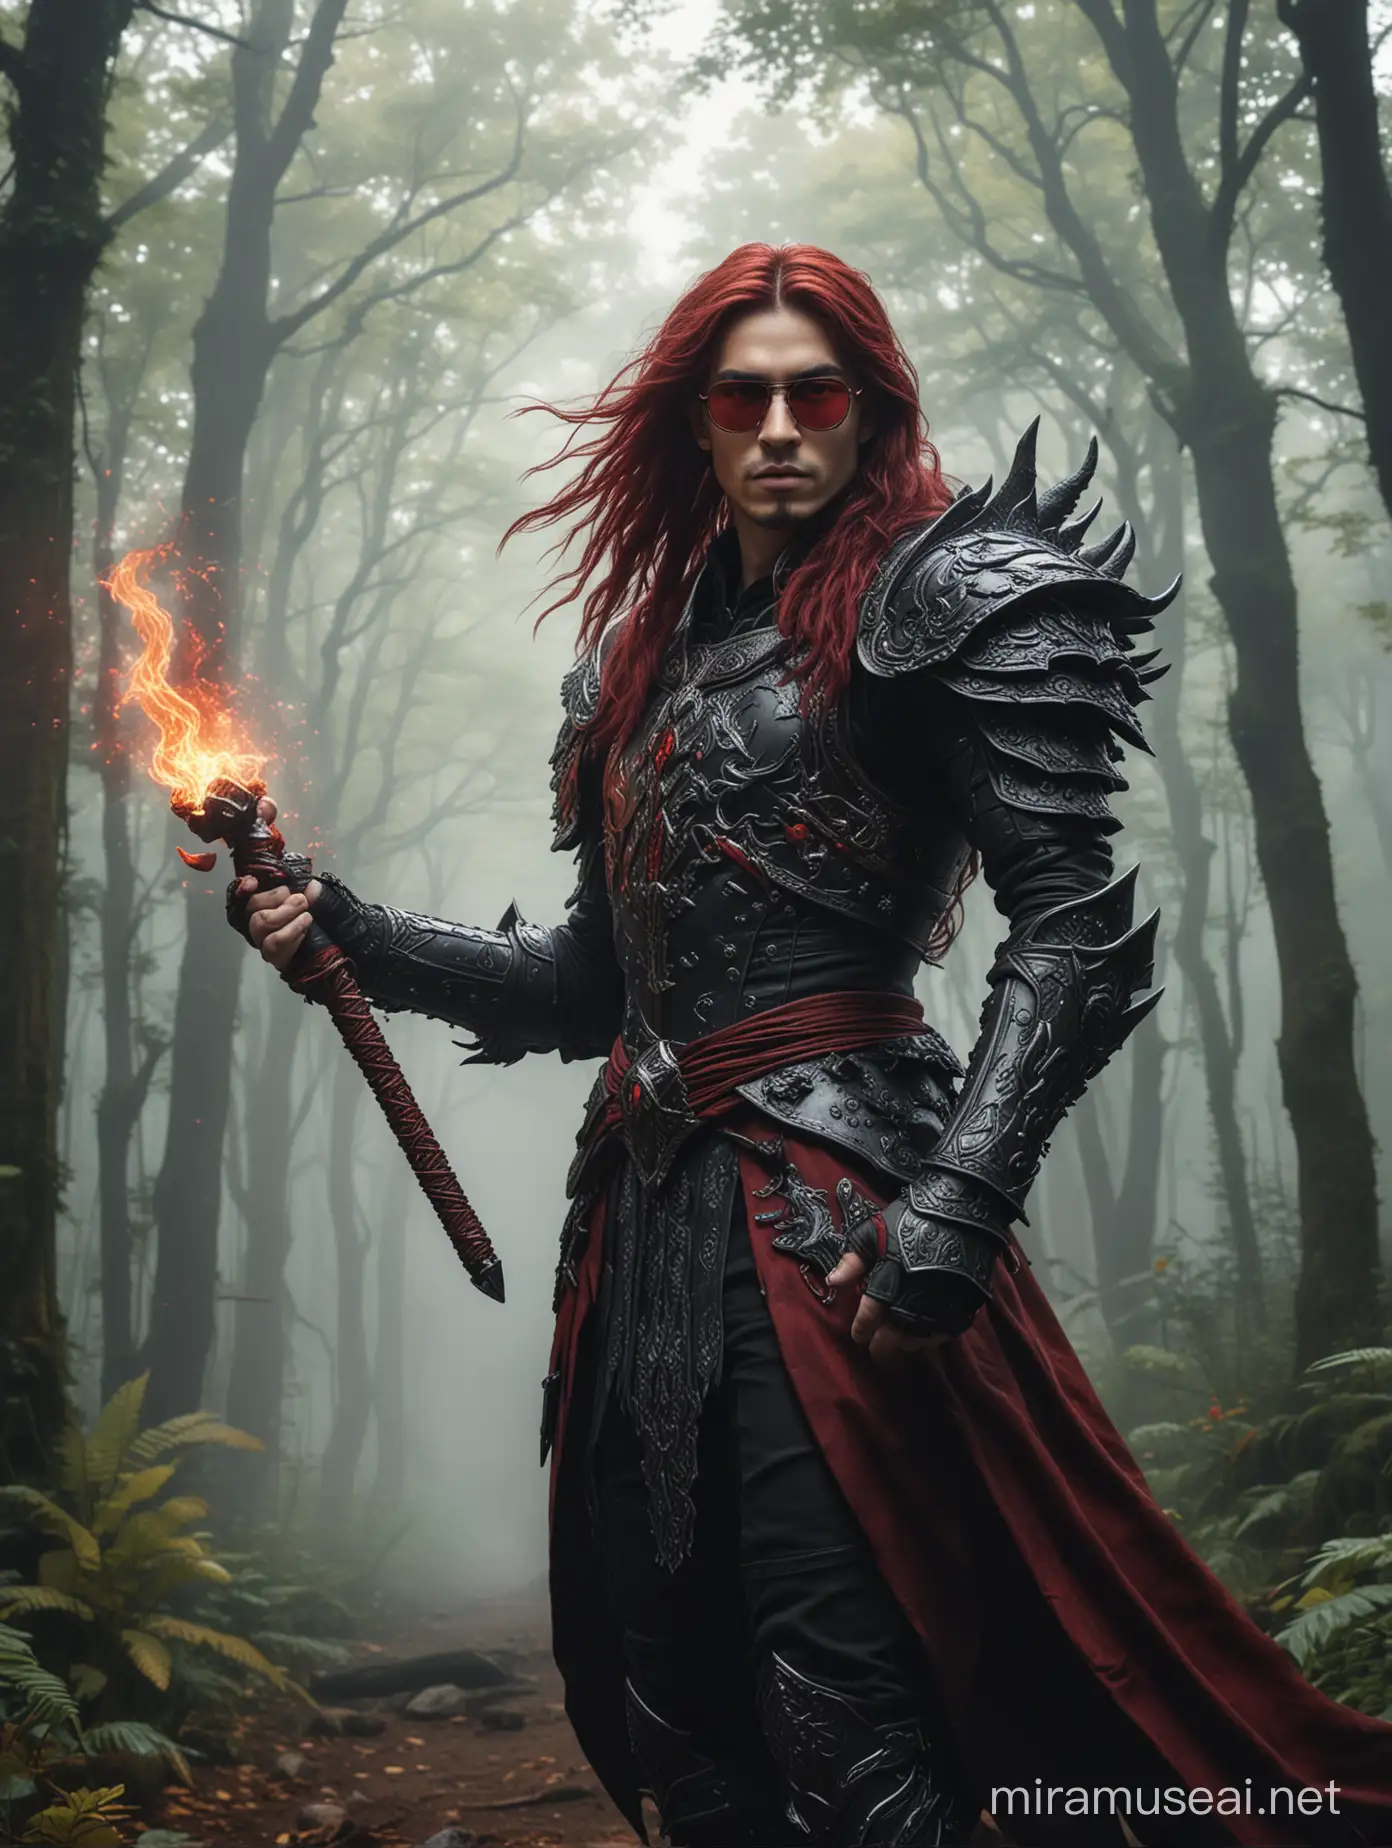 8K UHD, RAW, Goddess of dark magic. The picture shows a fantasy-themed image featuring a male figure long maroon hair, red glasses, with pronounced features in an elaborate black armor with paletina motifs. His left hand is raised, seemingly controlling a fiery dragon, which could symbolize power or a mystical bond with the creature. The background is a lush, misty forest that adds to the overall magical and mysterious atmosphere.